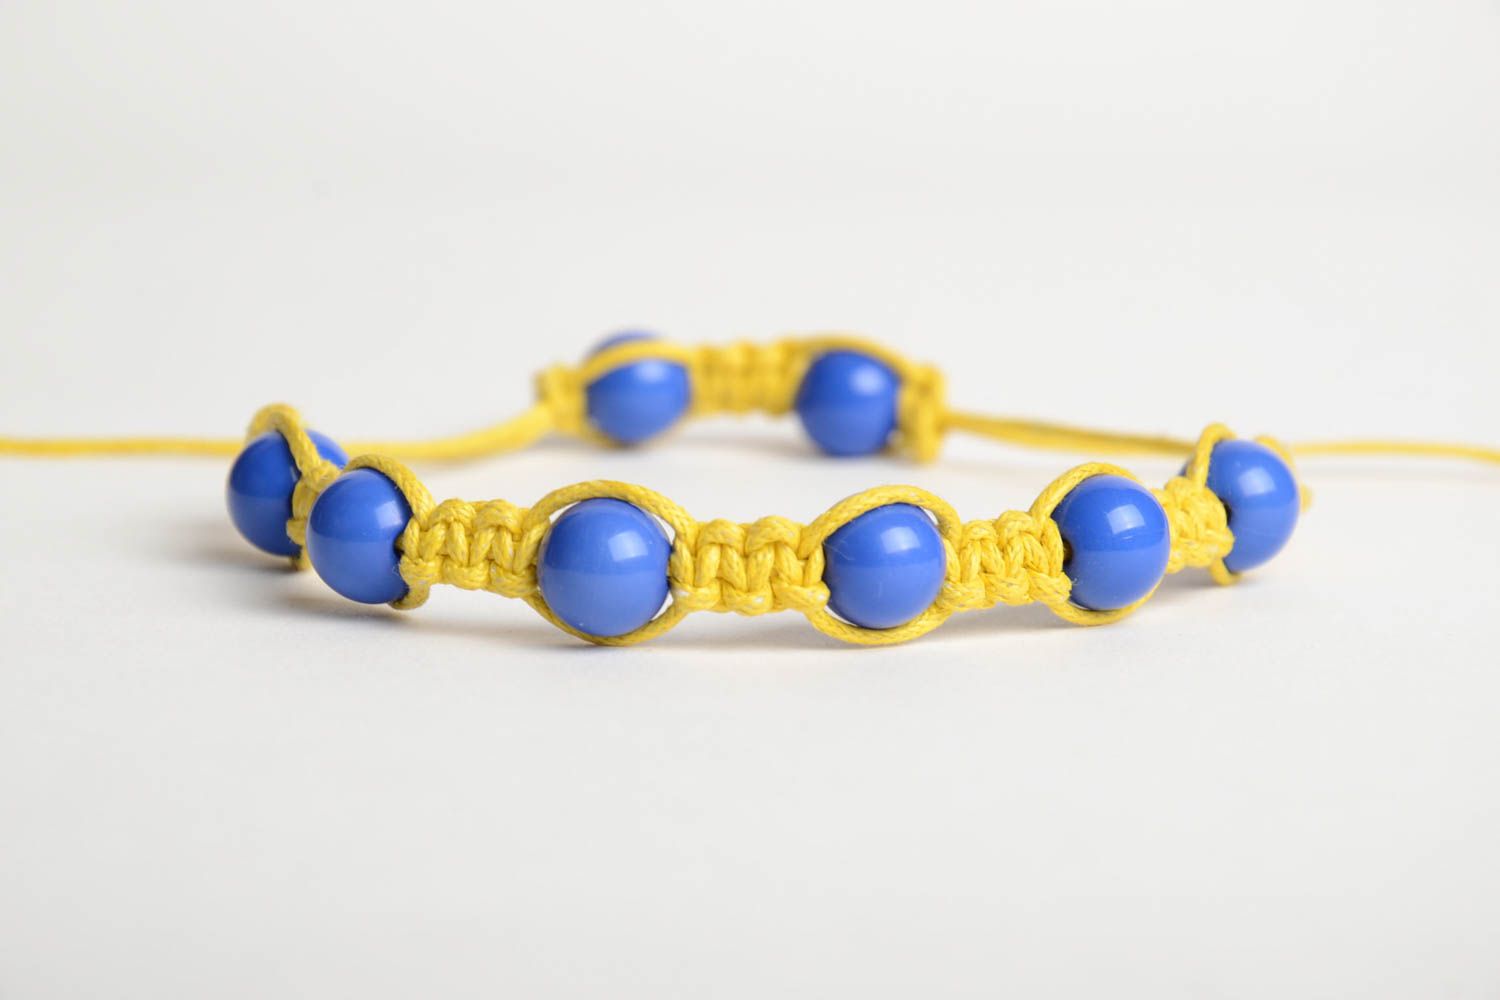 Handmade friendship bracelet woven of yellow cord and blue beads for children photo 5